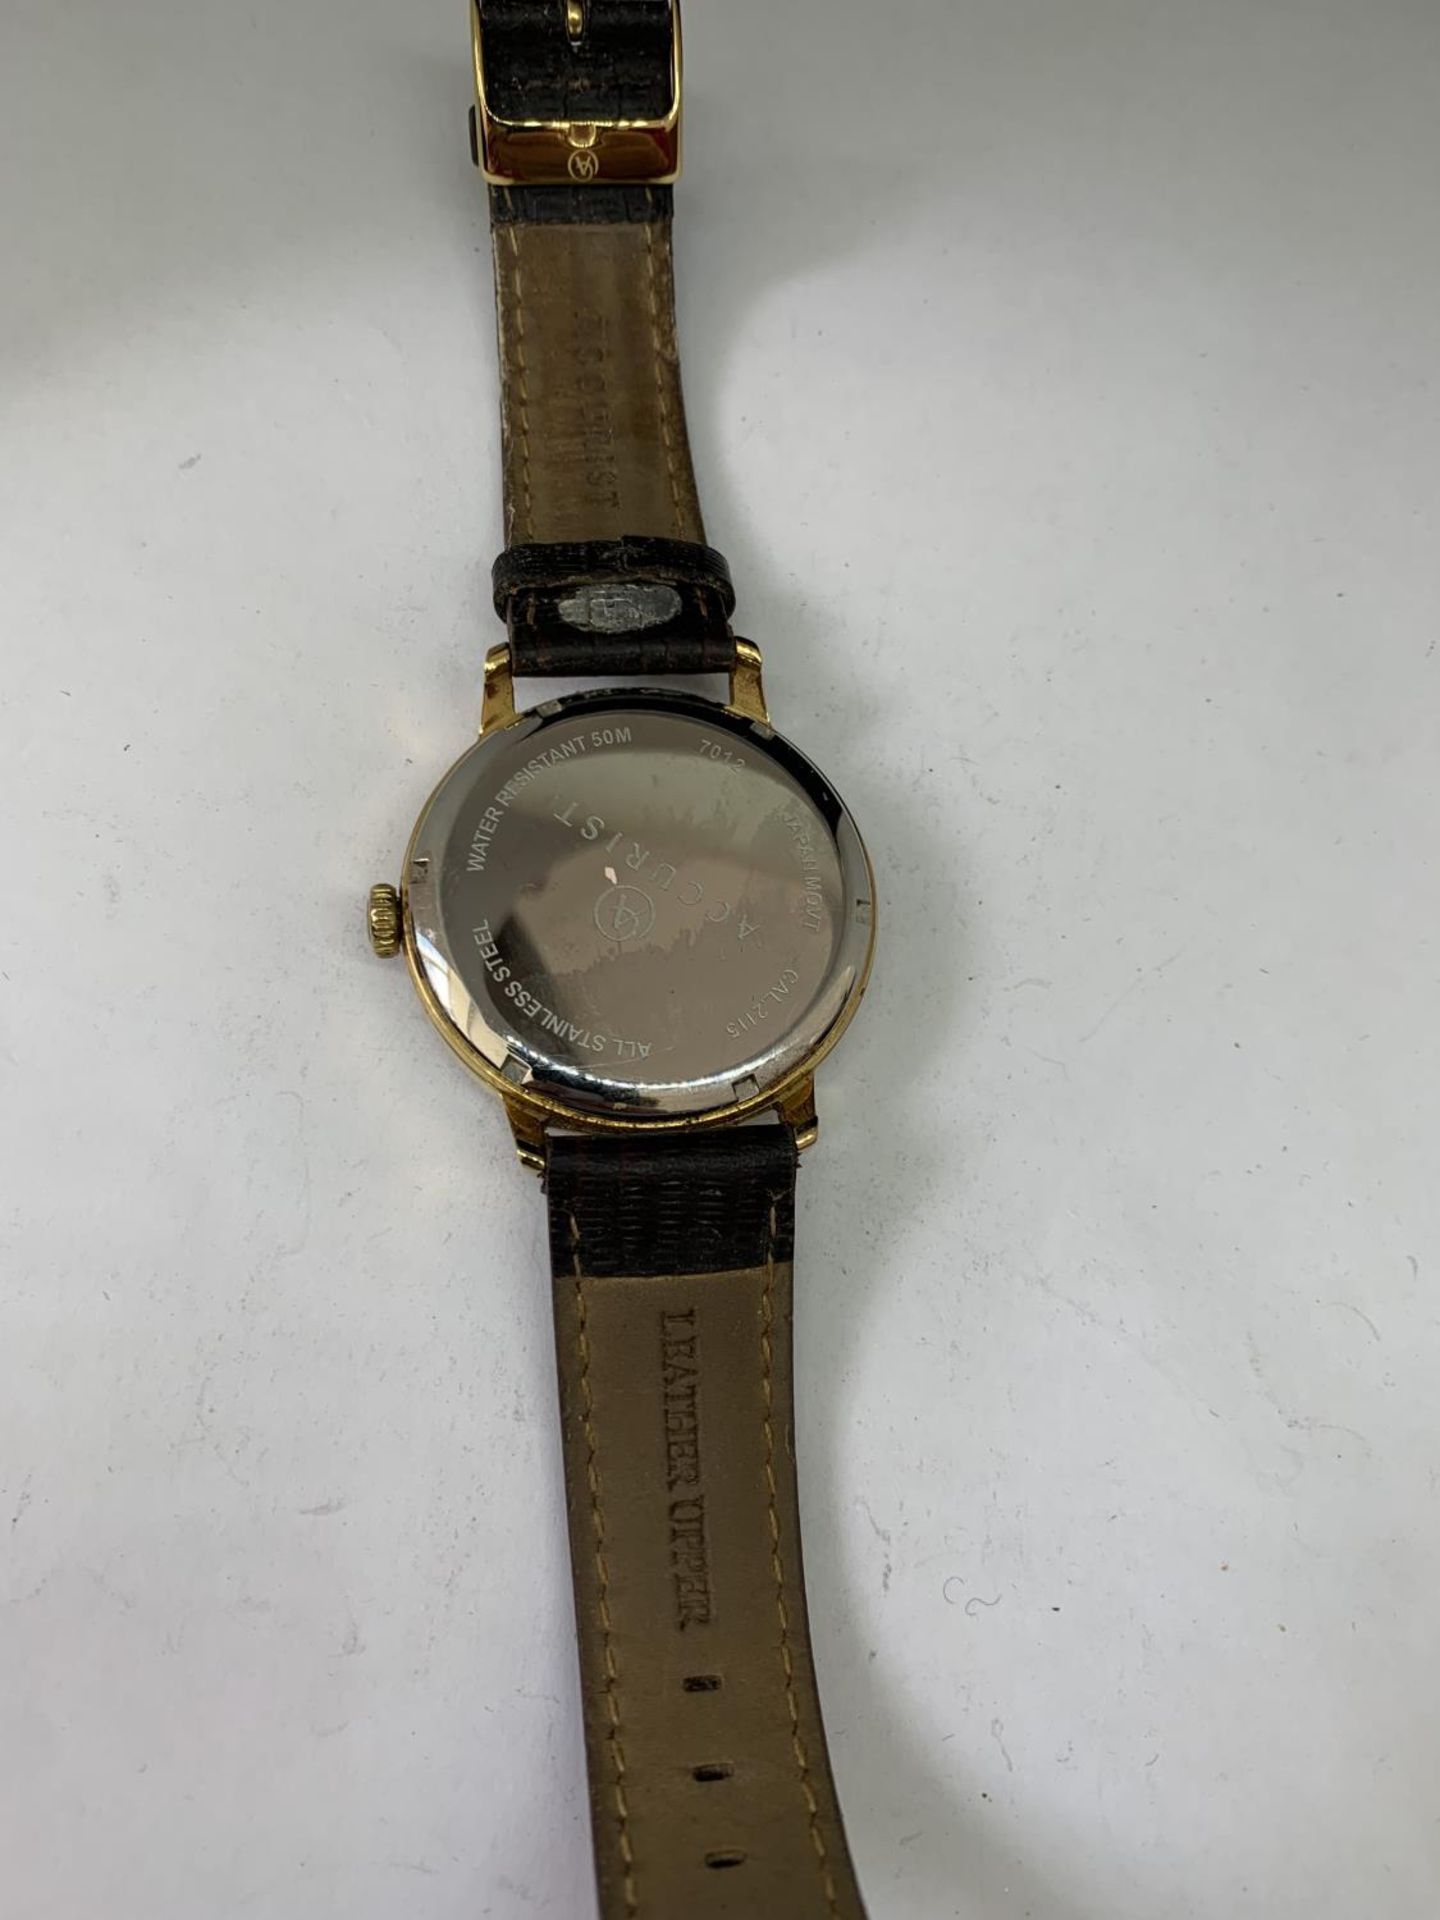 AN ACCURIST WRIST WATCH SEEN WORKING BUT NO WARRANTY - Image 3 of 3